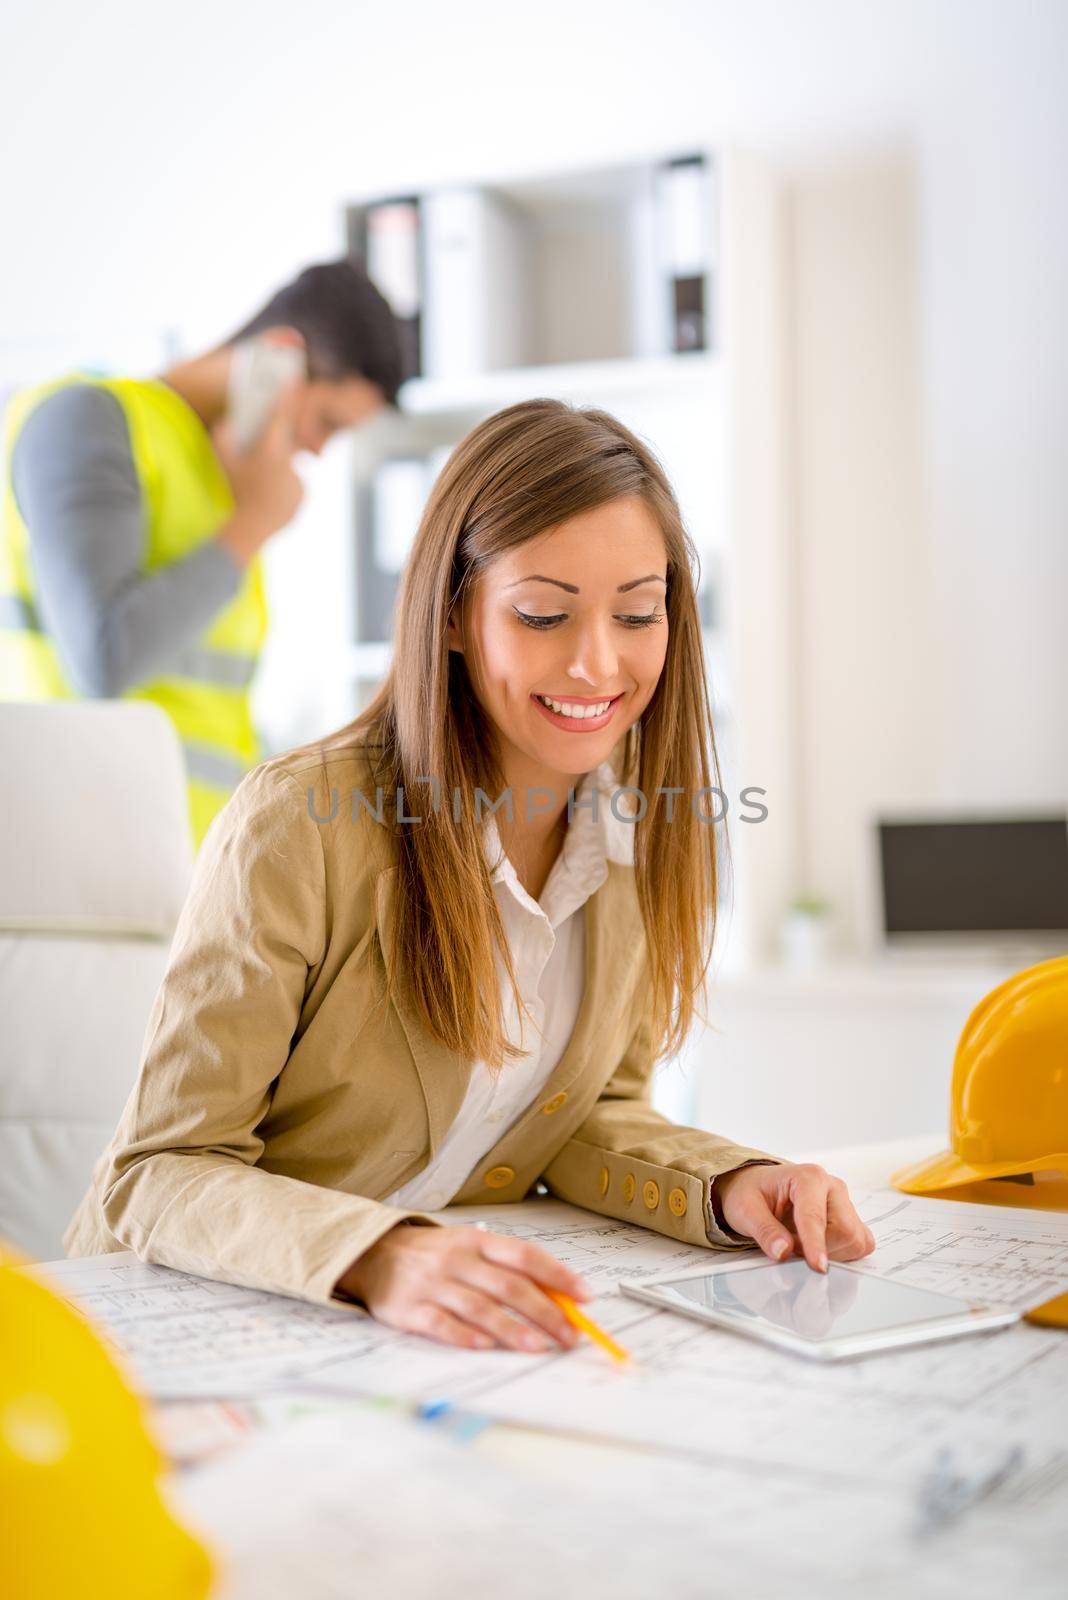 Smiling young woman constructor analyzing blueprint on tablet at desk in office.